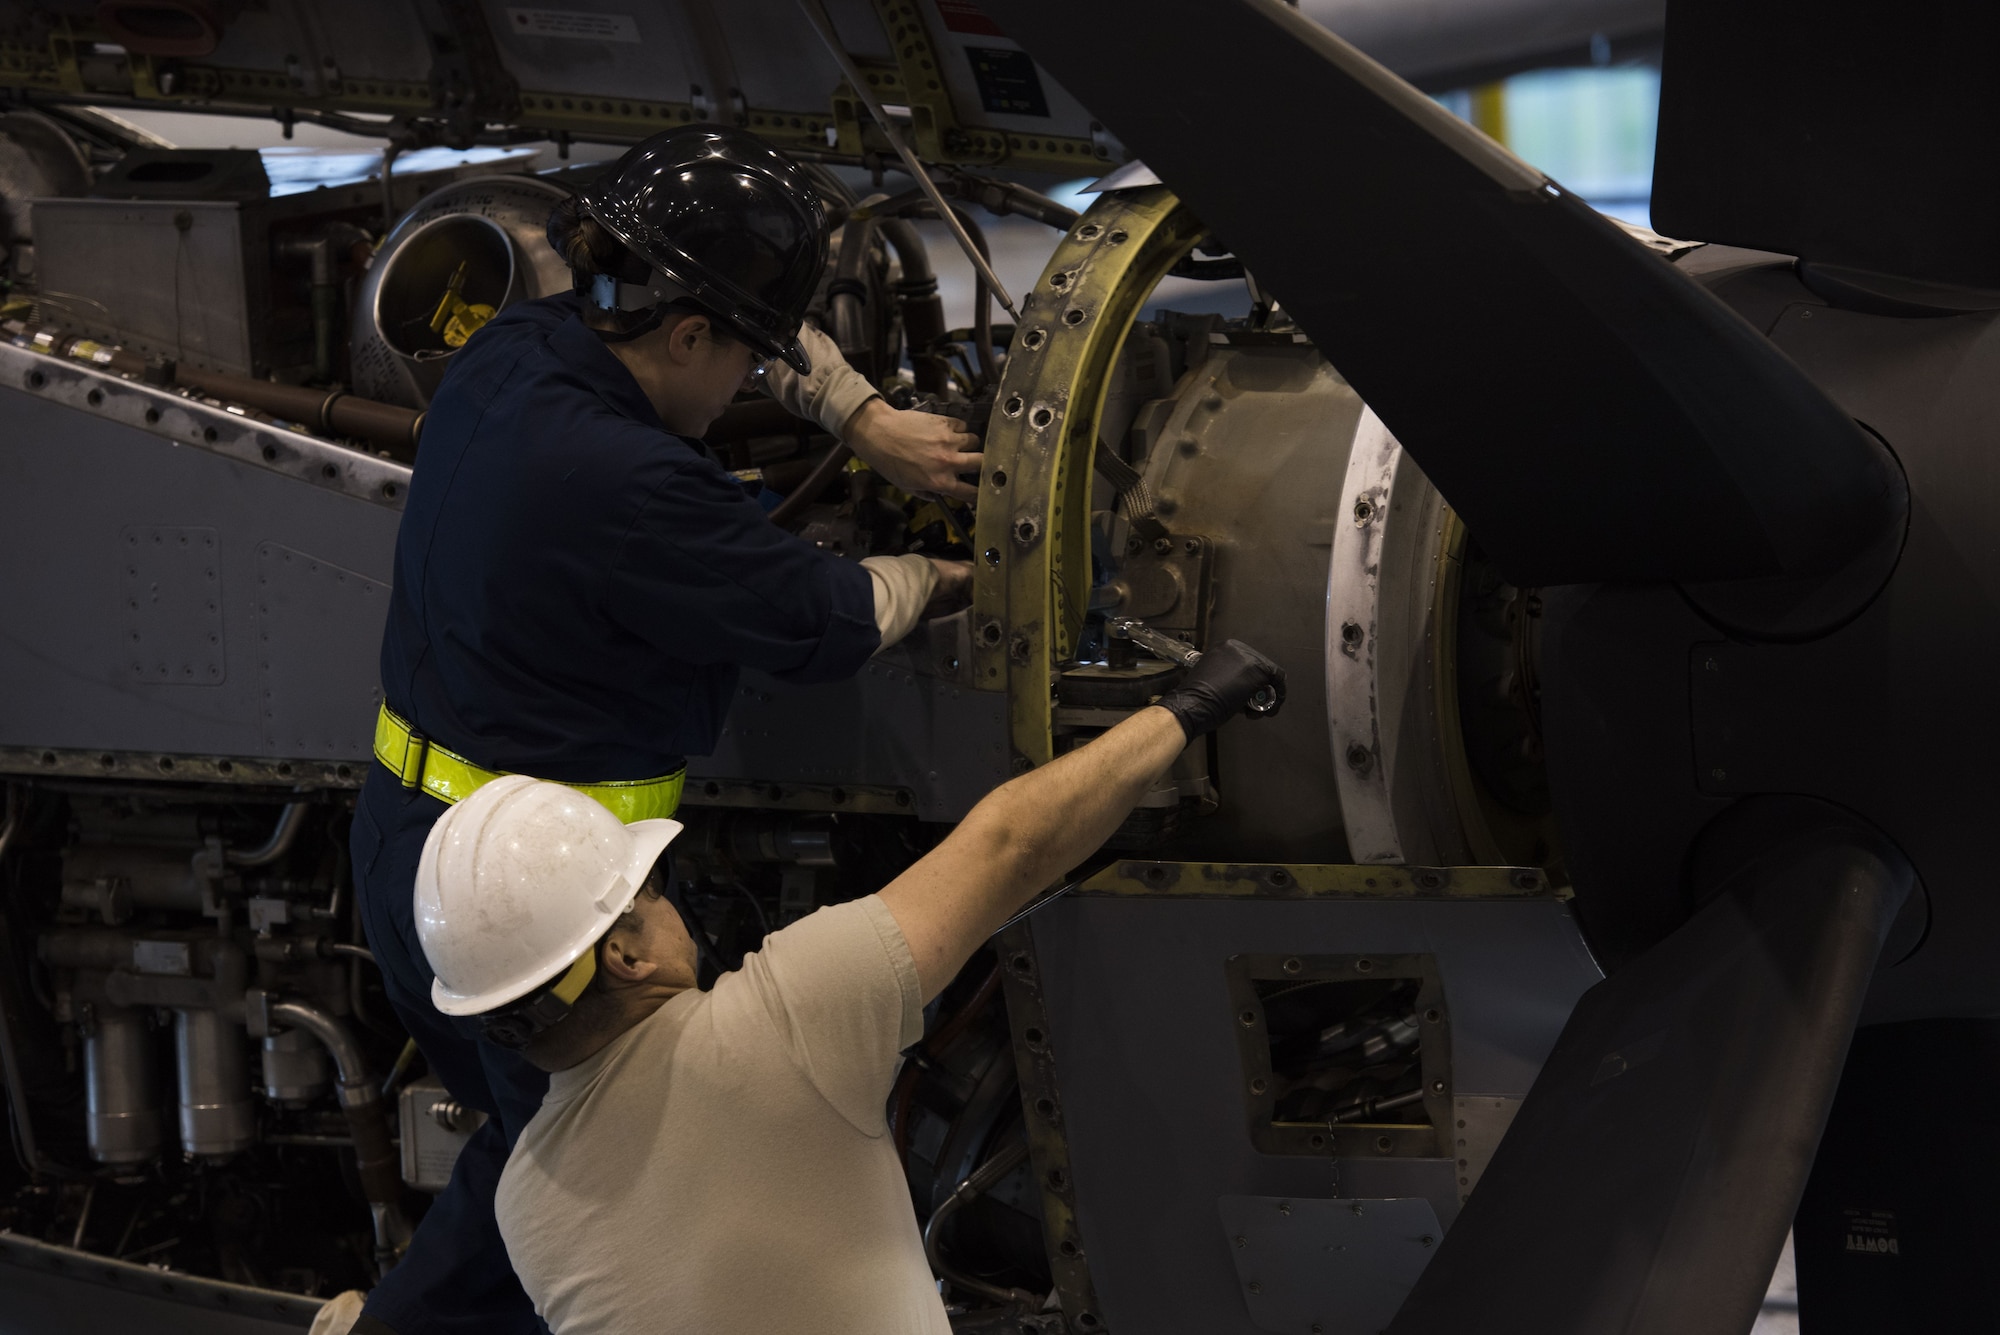 U.S. Air Force Staff Sgt. Lindsay Hallford (left), 86th Maintenance Squadron C-130J Super Hercules crew chief, and Staff Sgt. David Gilliland, 86th MXS aerospace propulsion craftsman, finish repairs on a C-130J engine during a C1-check on Ramstein Air Base, Germany, Dec. 5, 2017. Airmen from every career field in the maintenance squadron help get the aircraft airborne. (U.S. Air Force photo by Senior Airman Devin M. Rumbaugh)